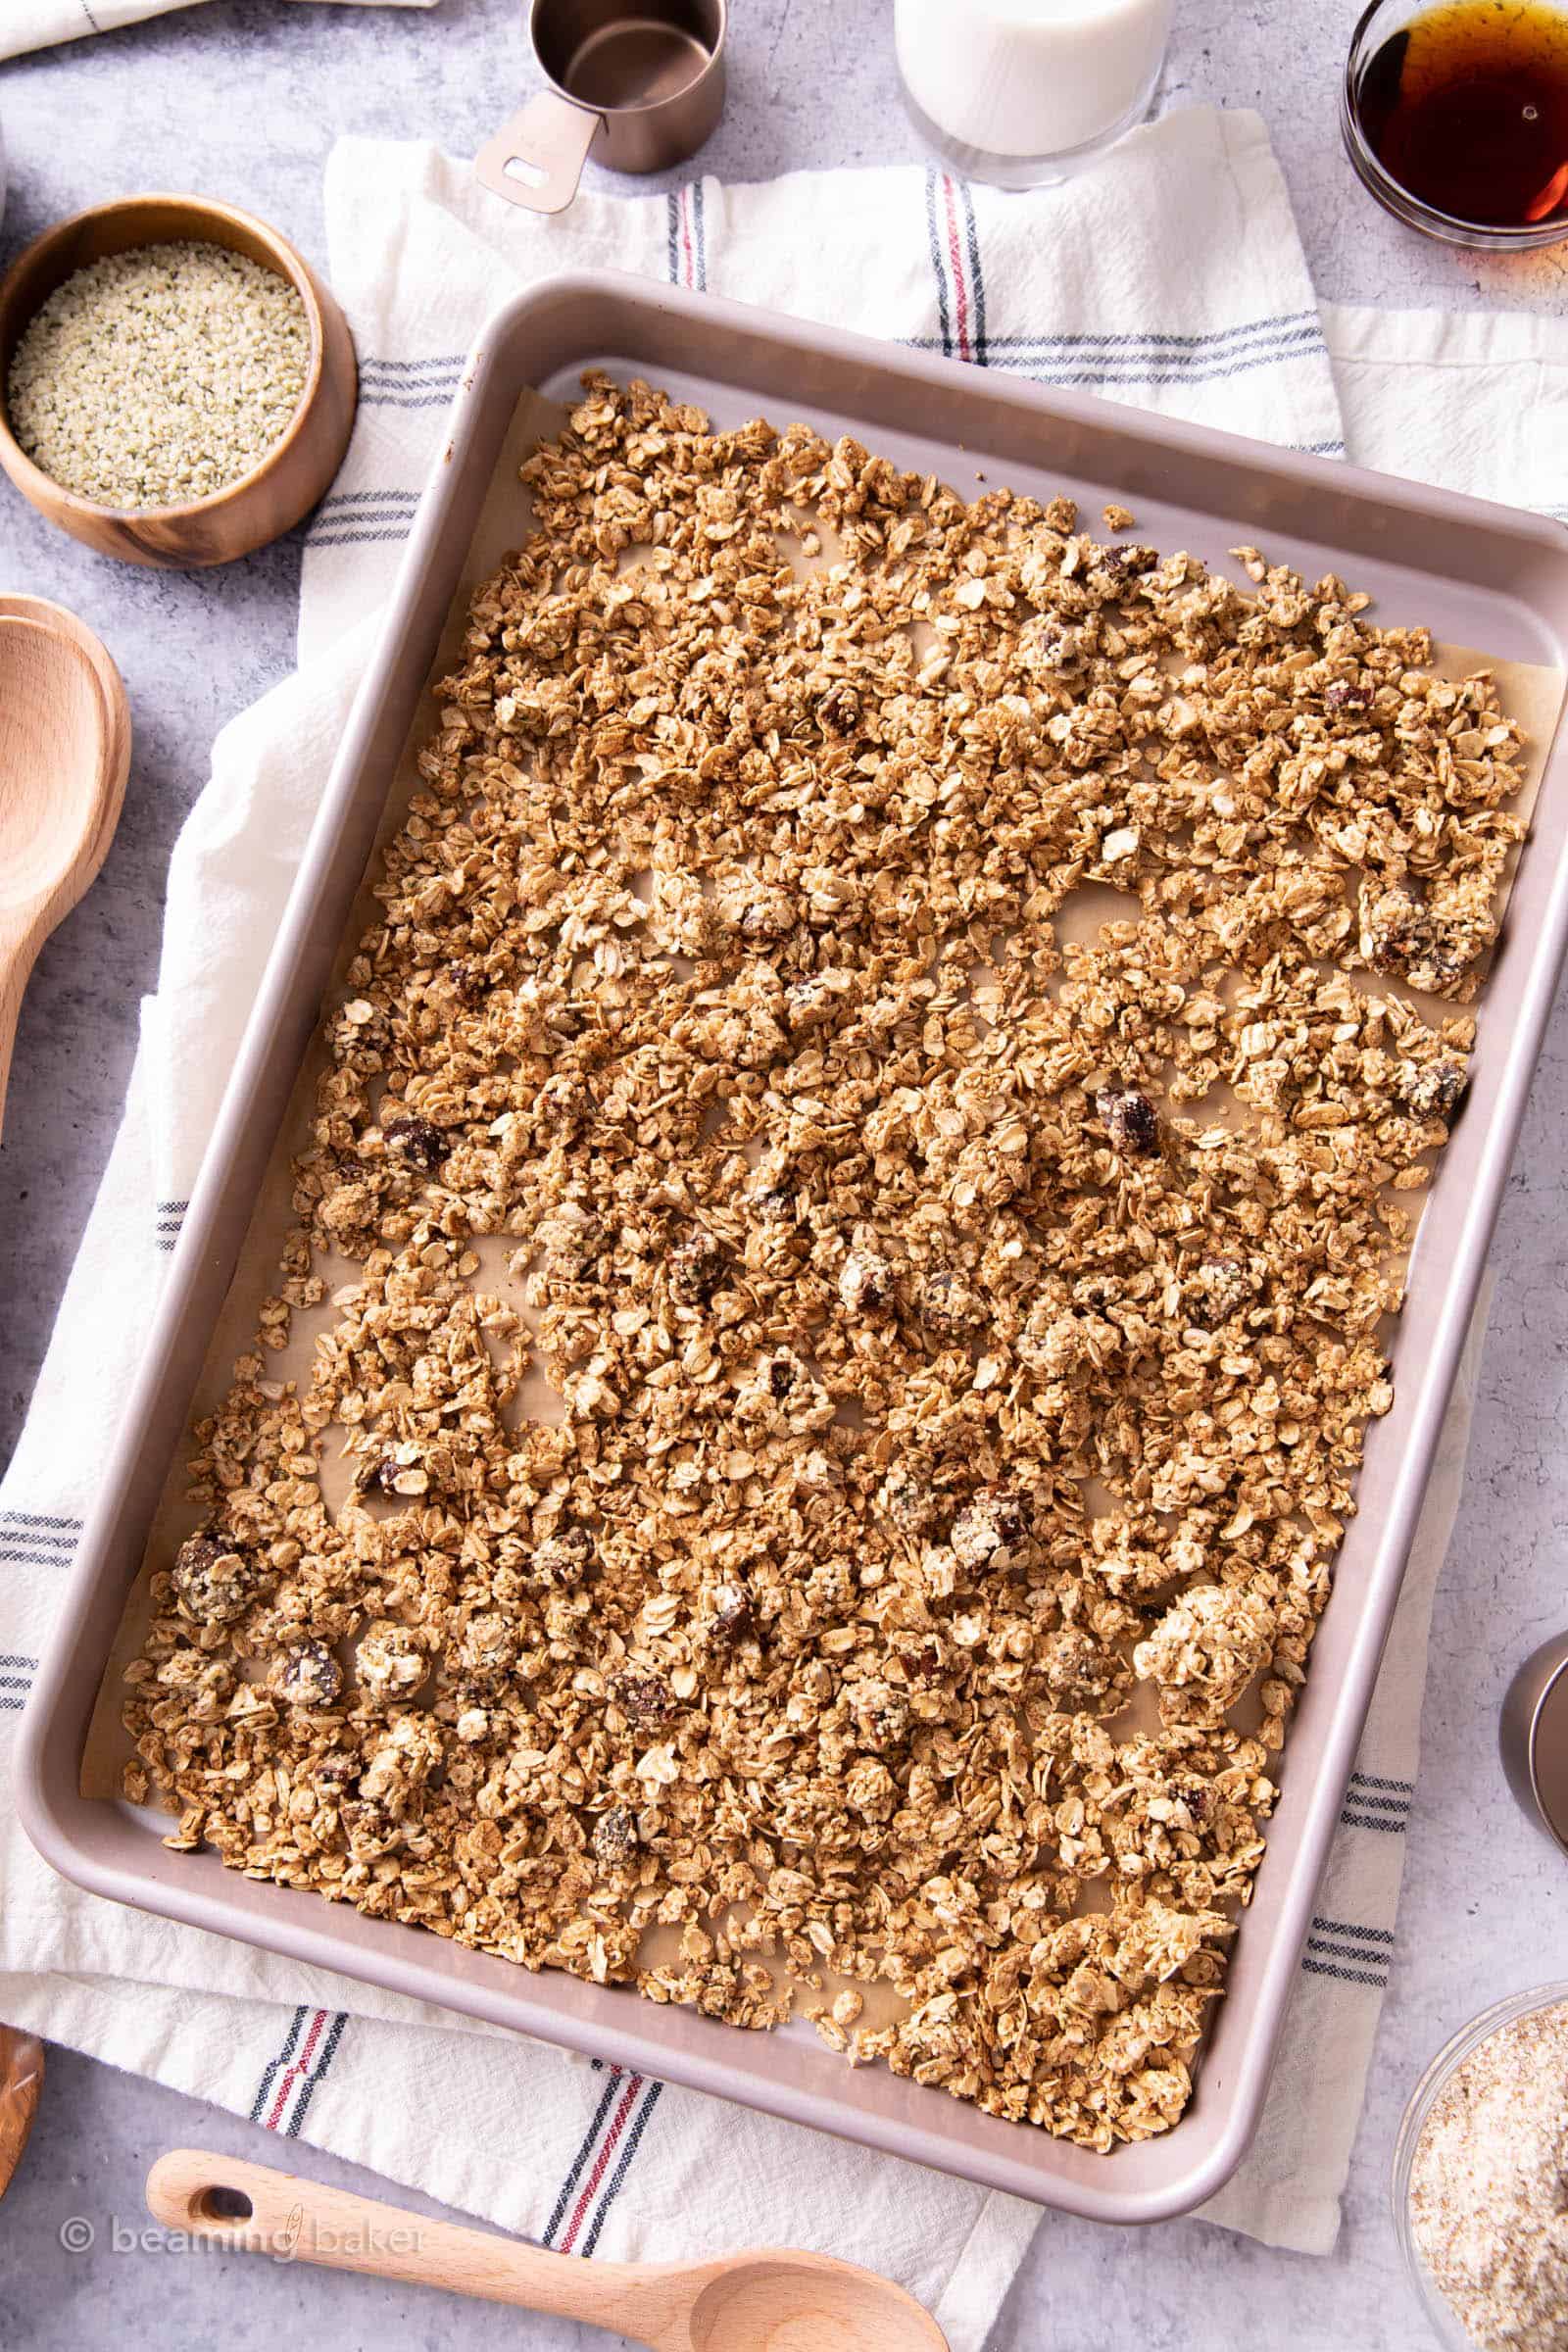 rose gold baking sheet filled with hemp granola on a plaid kitchen cloth